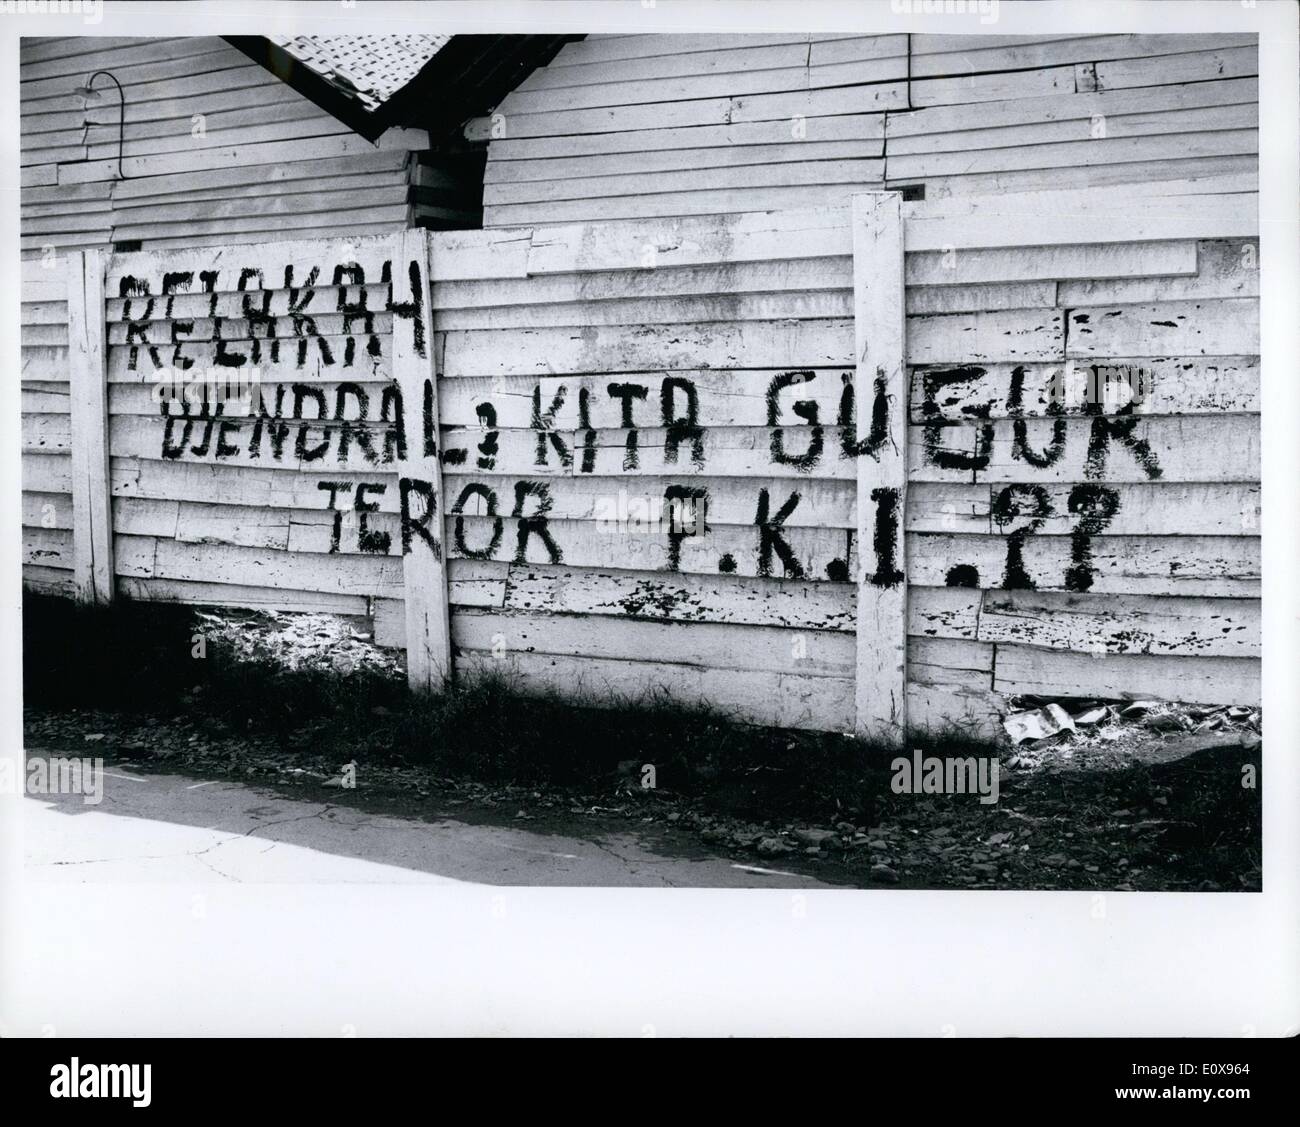 Oct. 10, 1965 - Indonesia: Djakarta - fence in city after aborted communist coup of Oct. 1, 1965, says that communist party is traitor to the Indonesian revolution and charges terror tactics. These signs were seen throughout countryside after the coup. Stock Photo